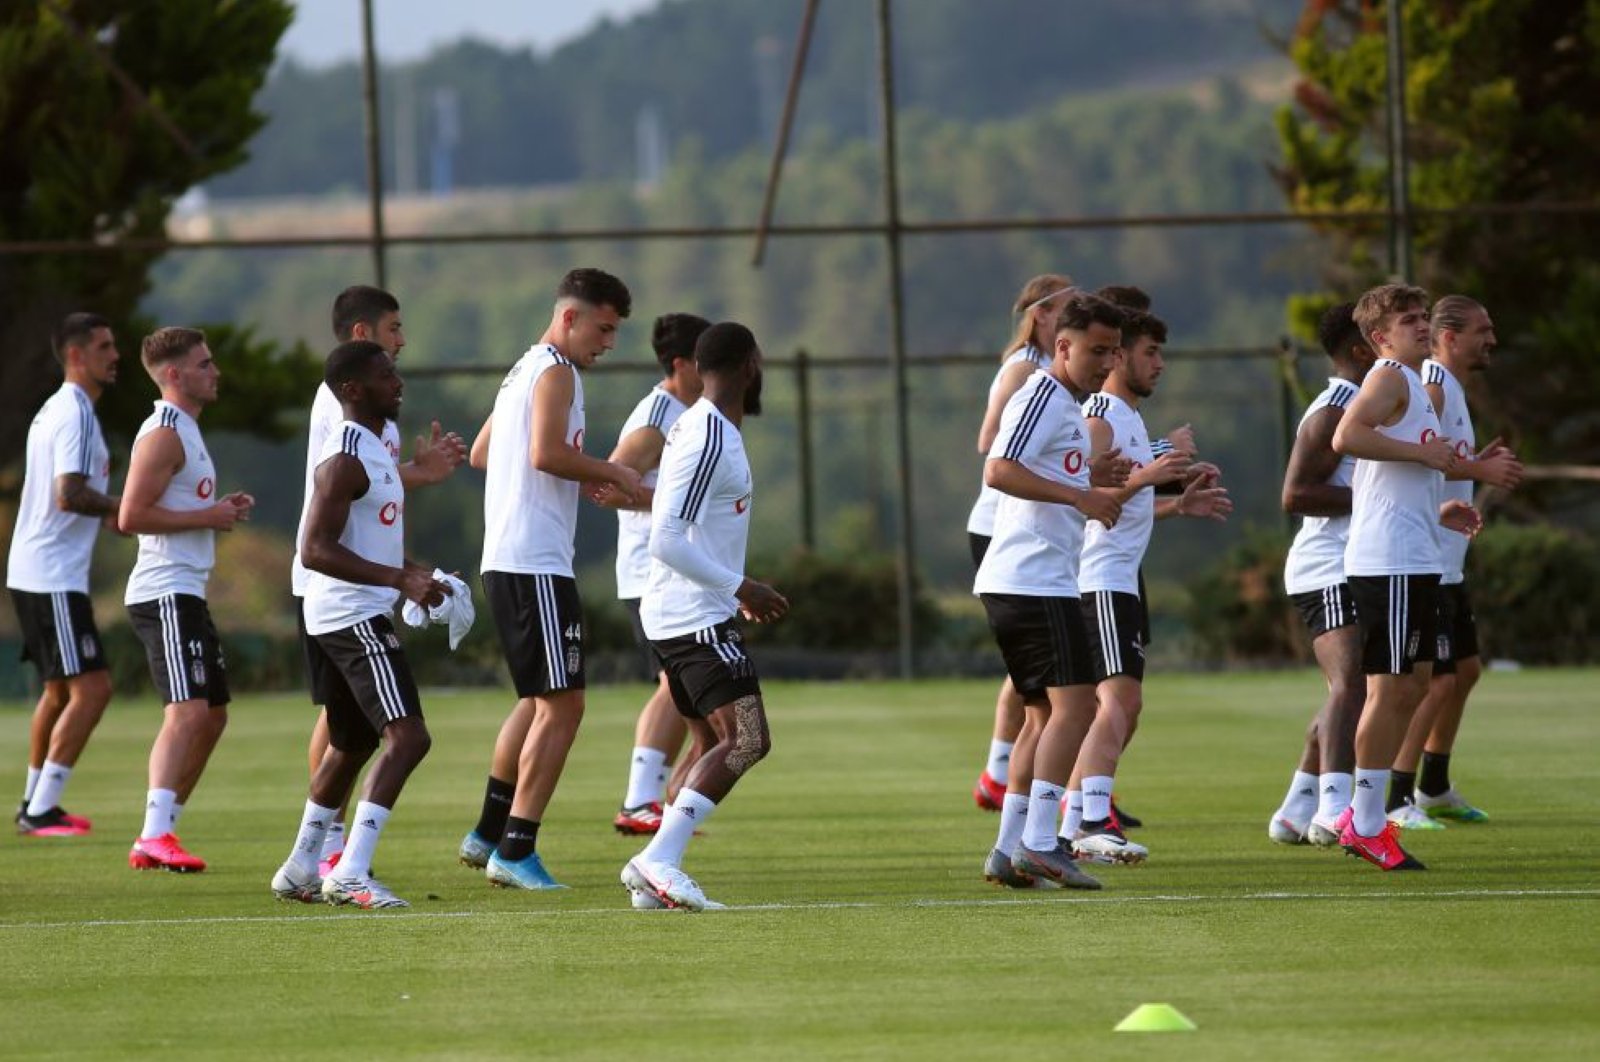 Beşiktaş players during a training session in Nevzat Demir facilities in Istanbul, Turkey, June 25, 2020. (DHA Photo)